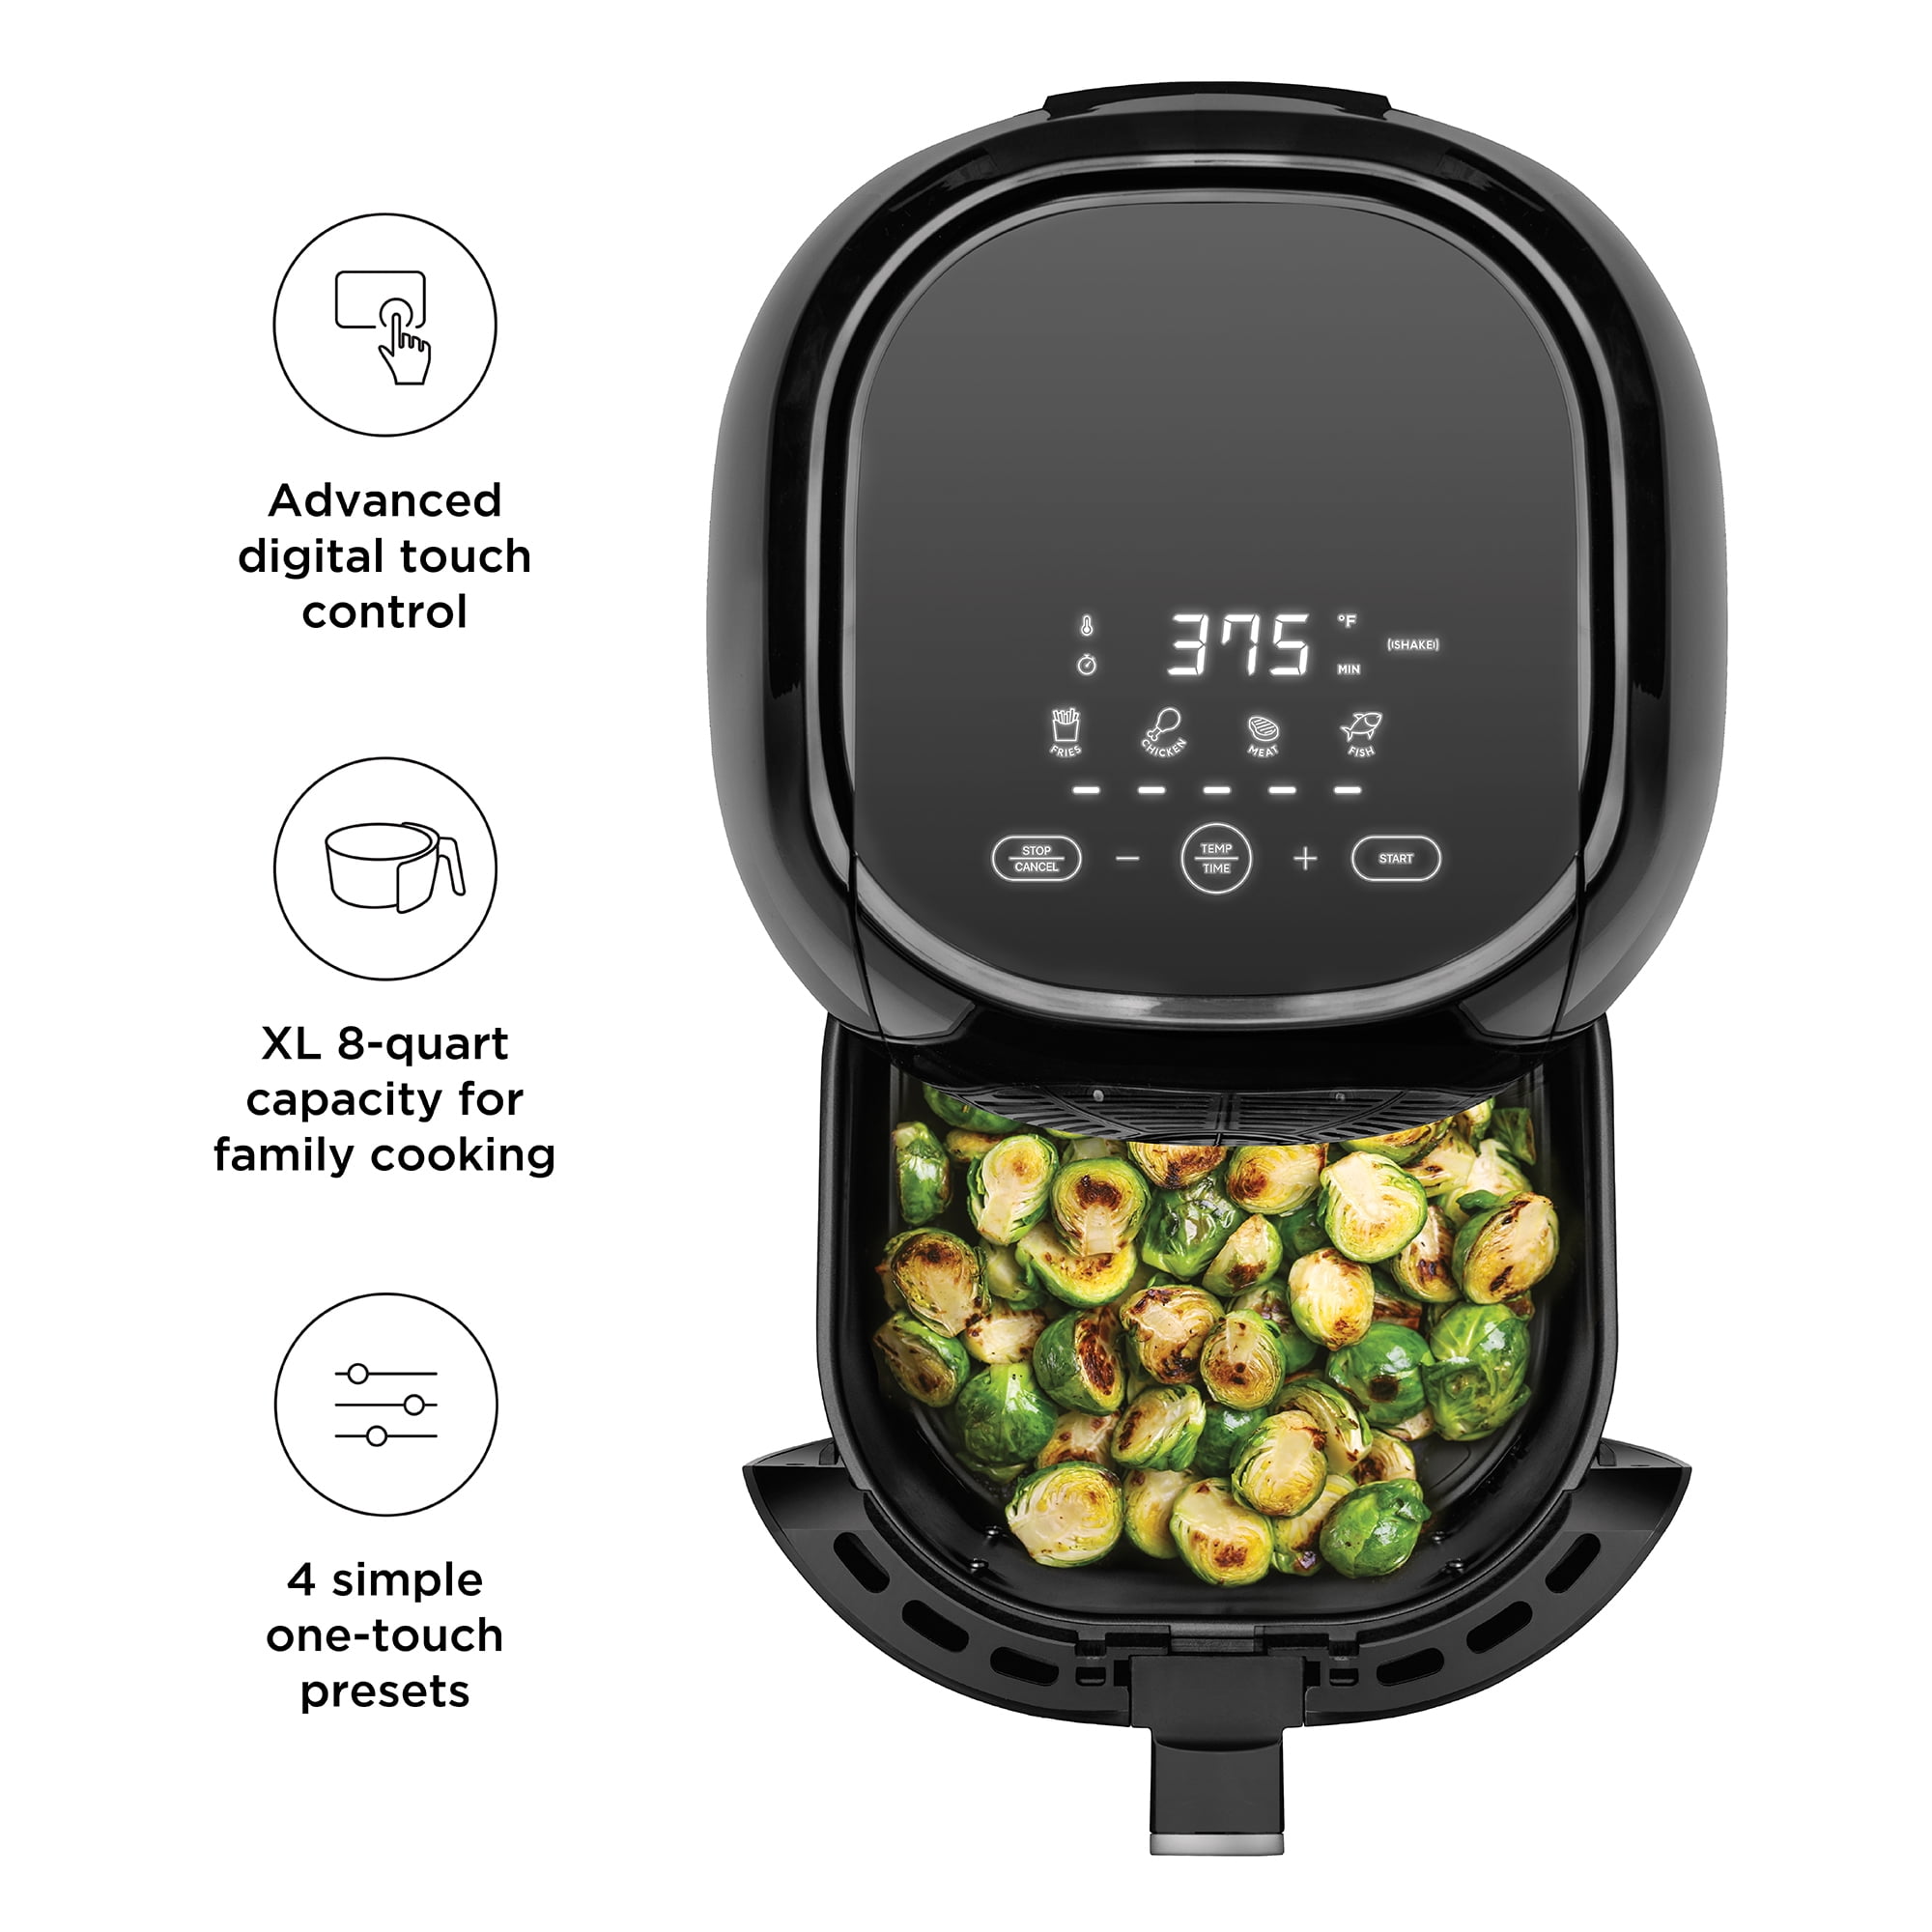 Chefman Air Fryer 8 Qt with Probe Thermometer, 8 Preset Functions, 1-Touch  Digital Display Compact Cooker, Extra Large Nonstick Square Air Fryer